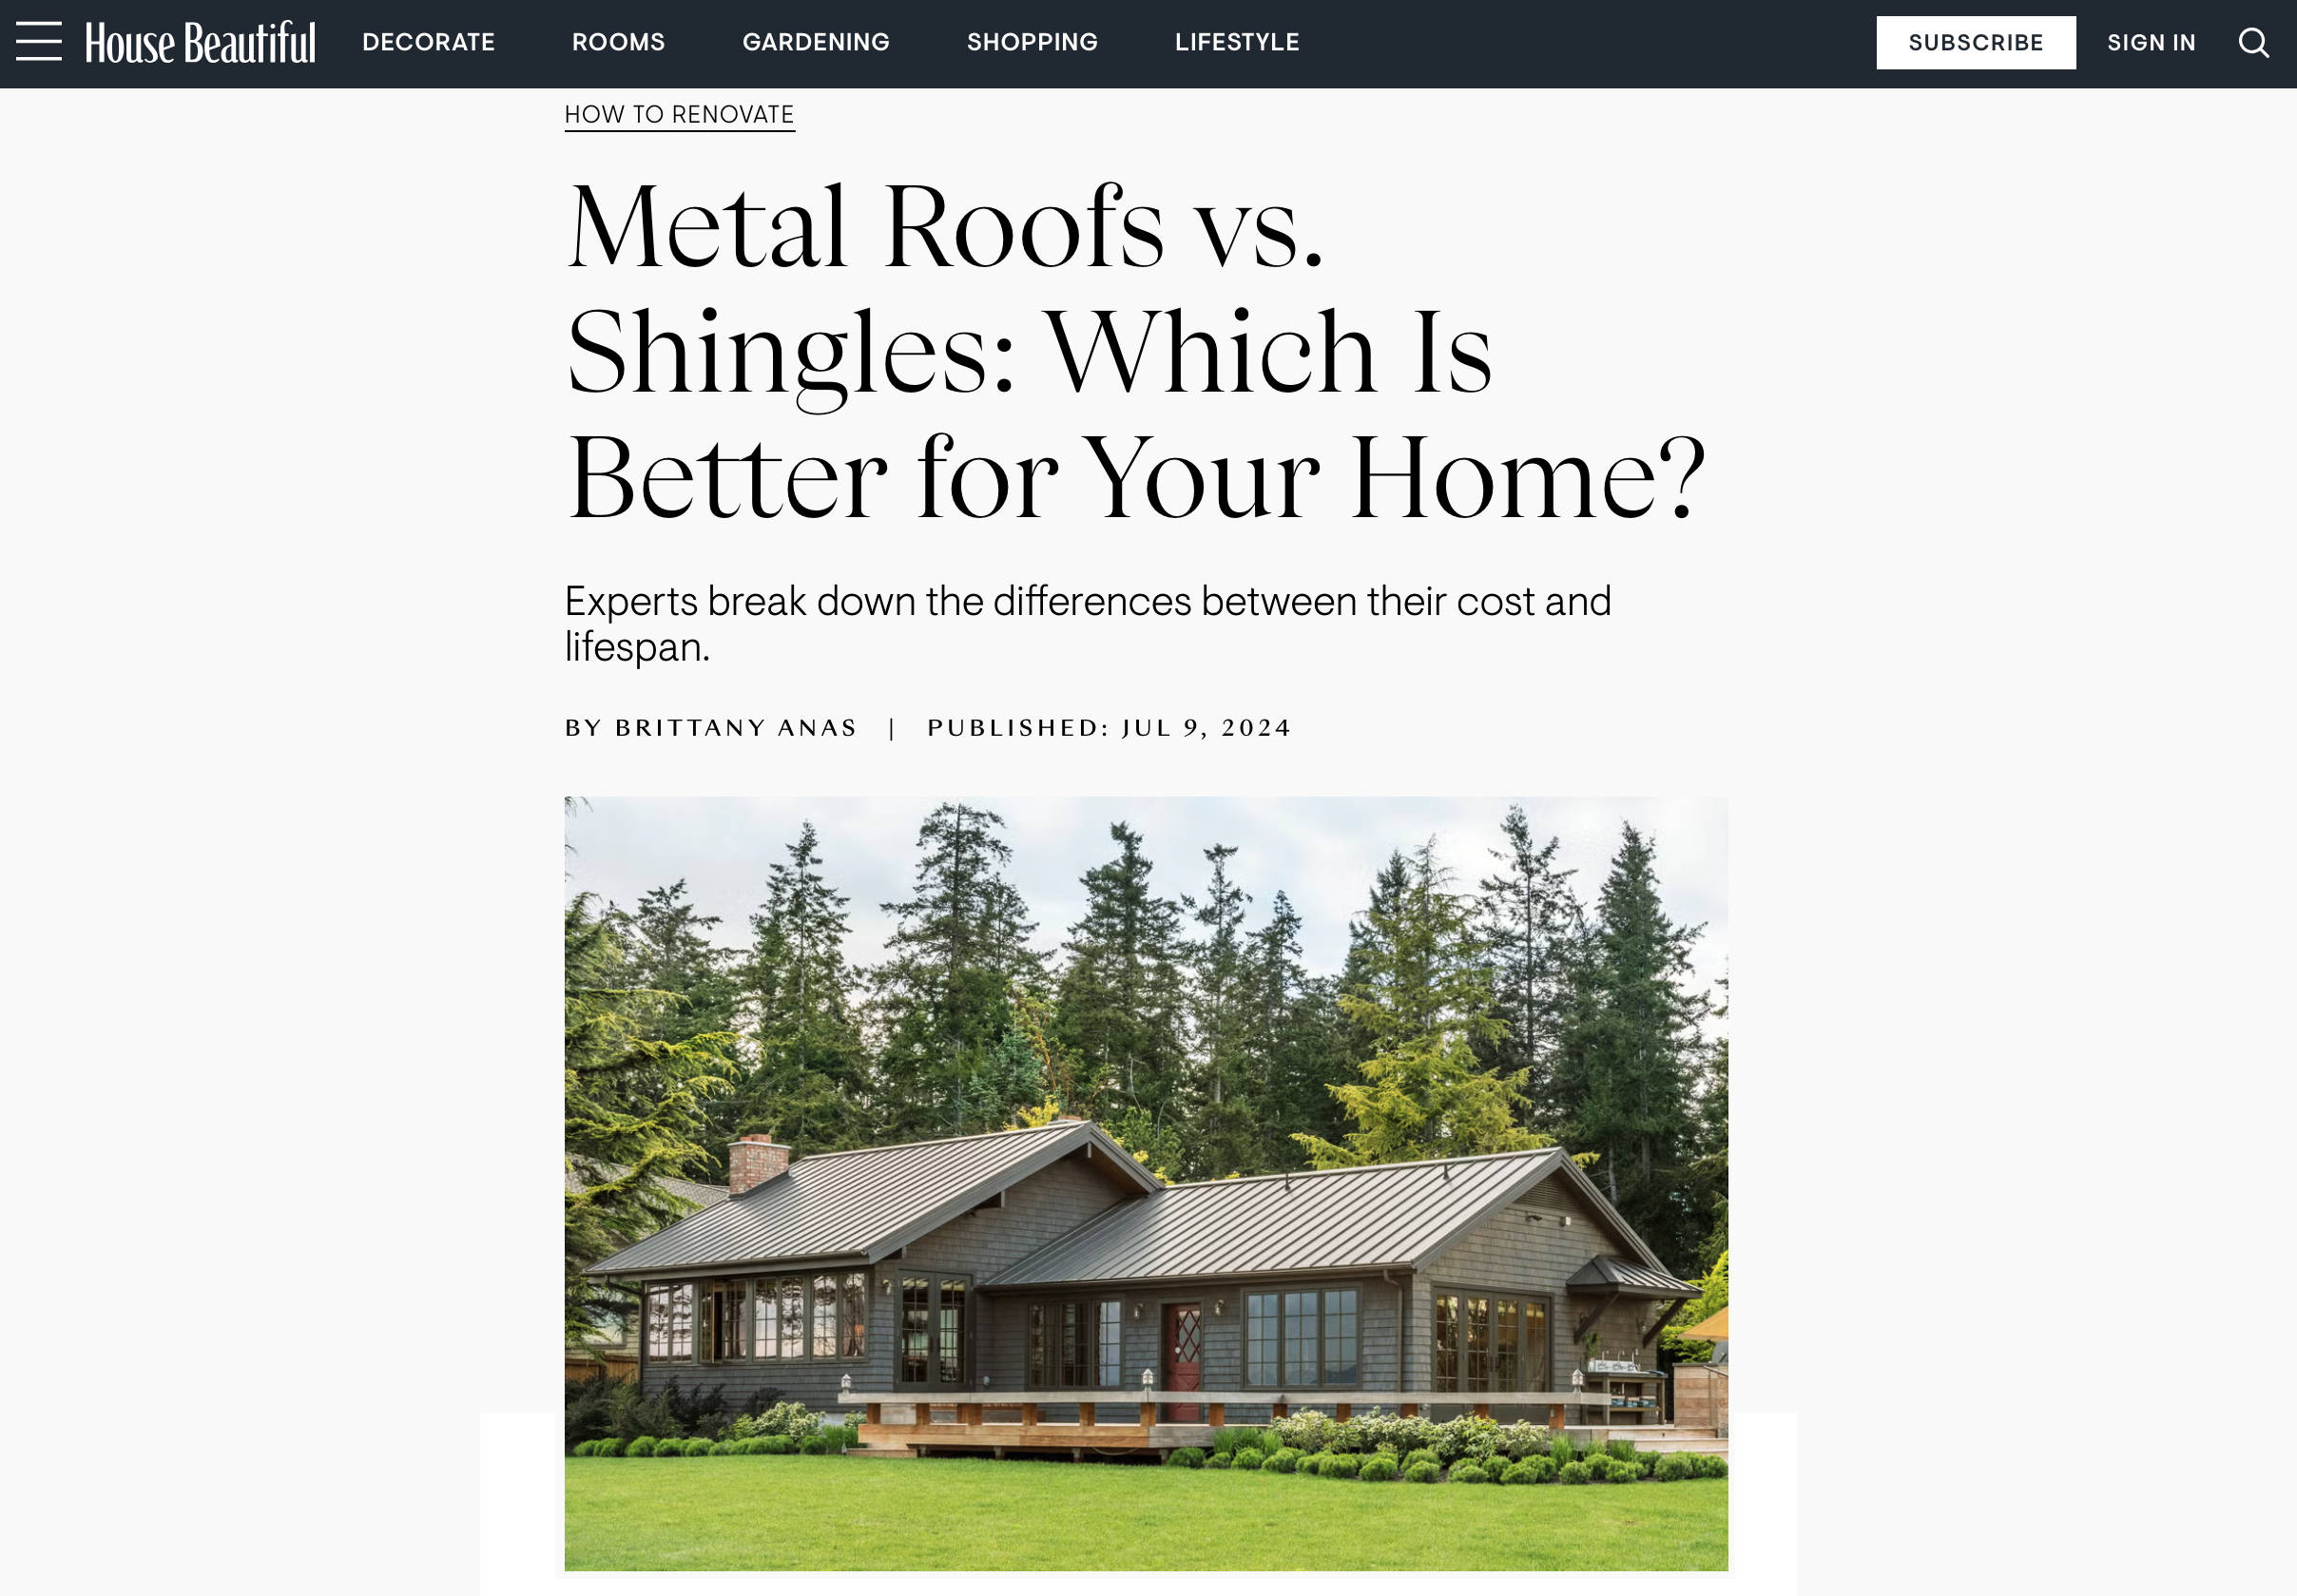 Todd Miller quoted in House Beautiful article  Metal Roofs vs. Shingles: Which Is Better for Your Home? July 2024